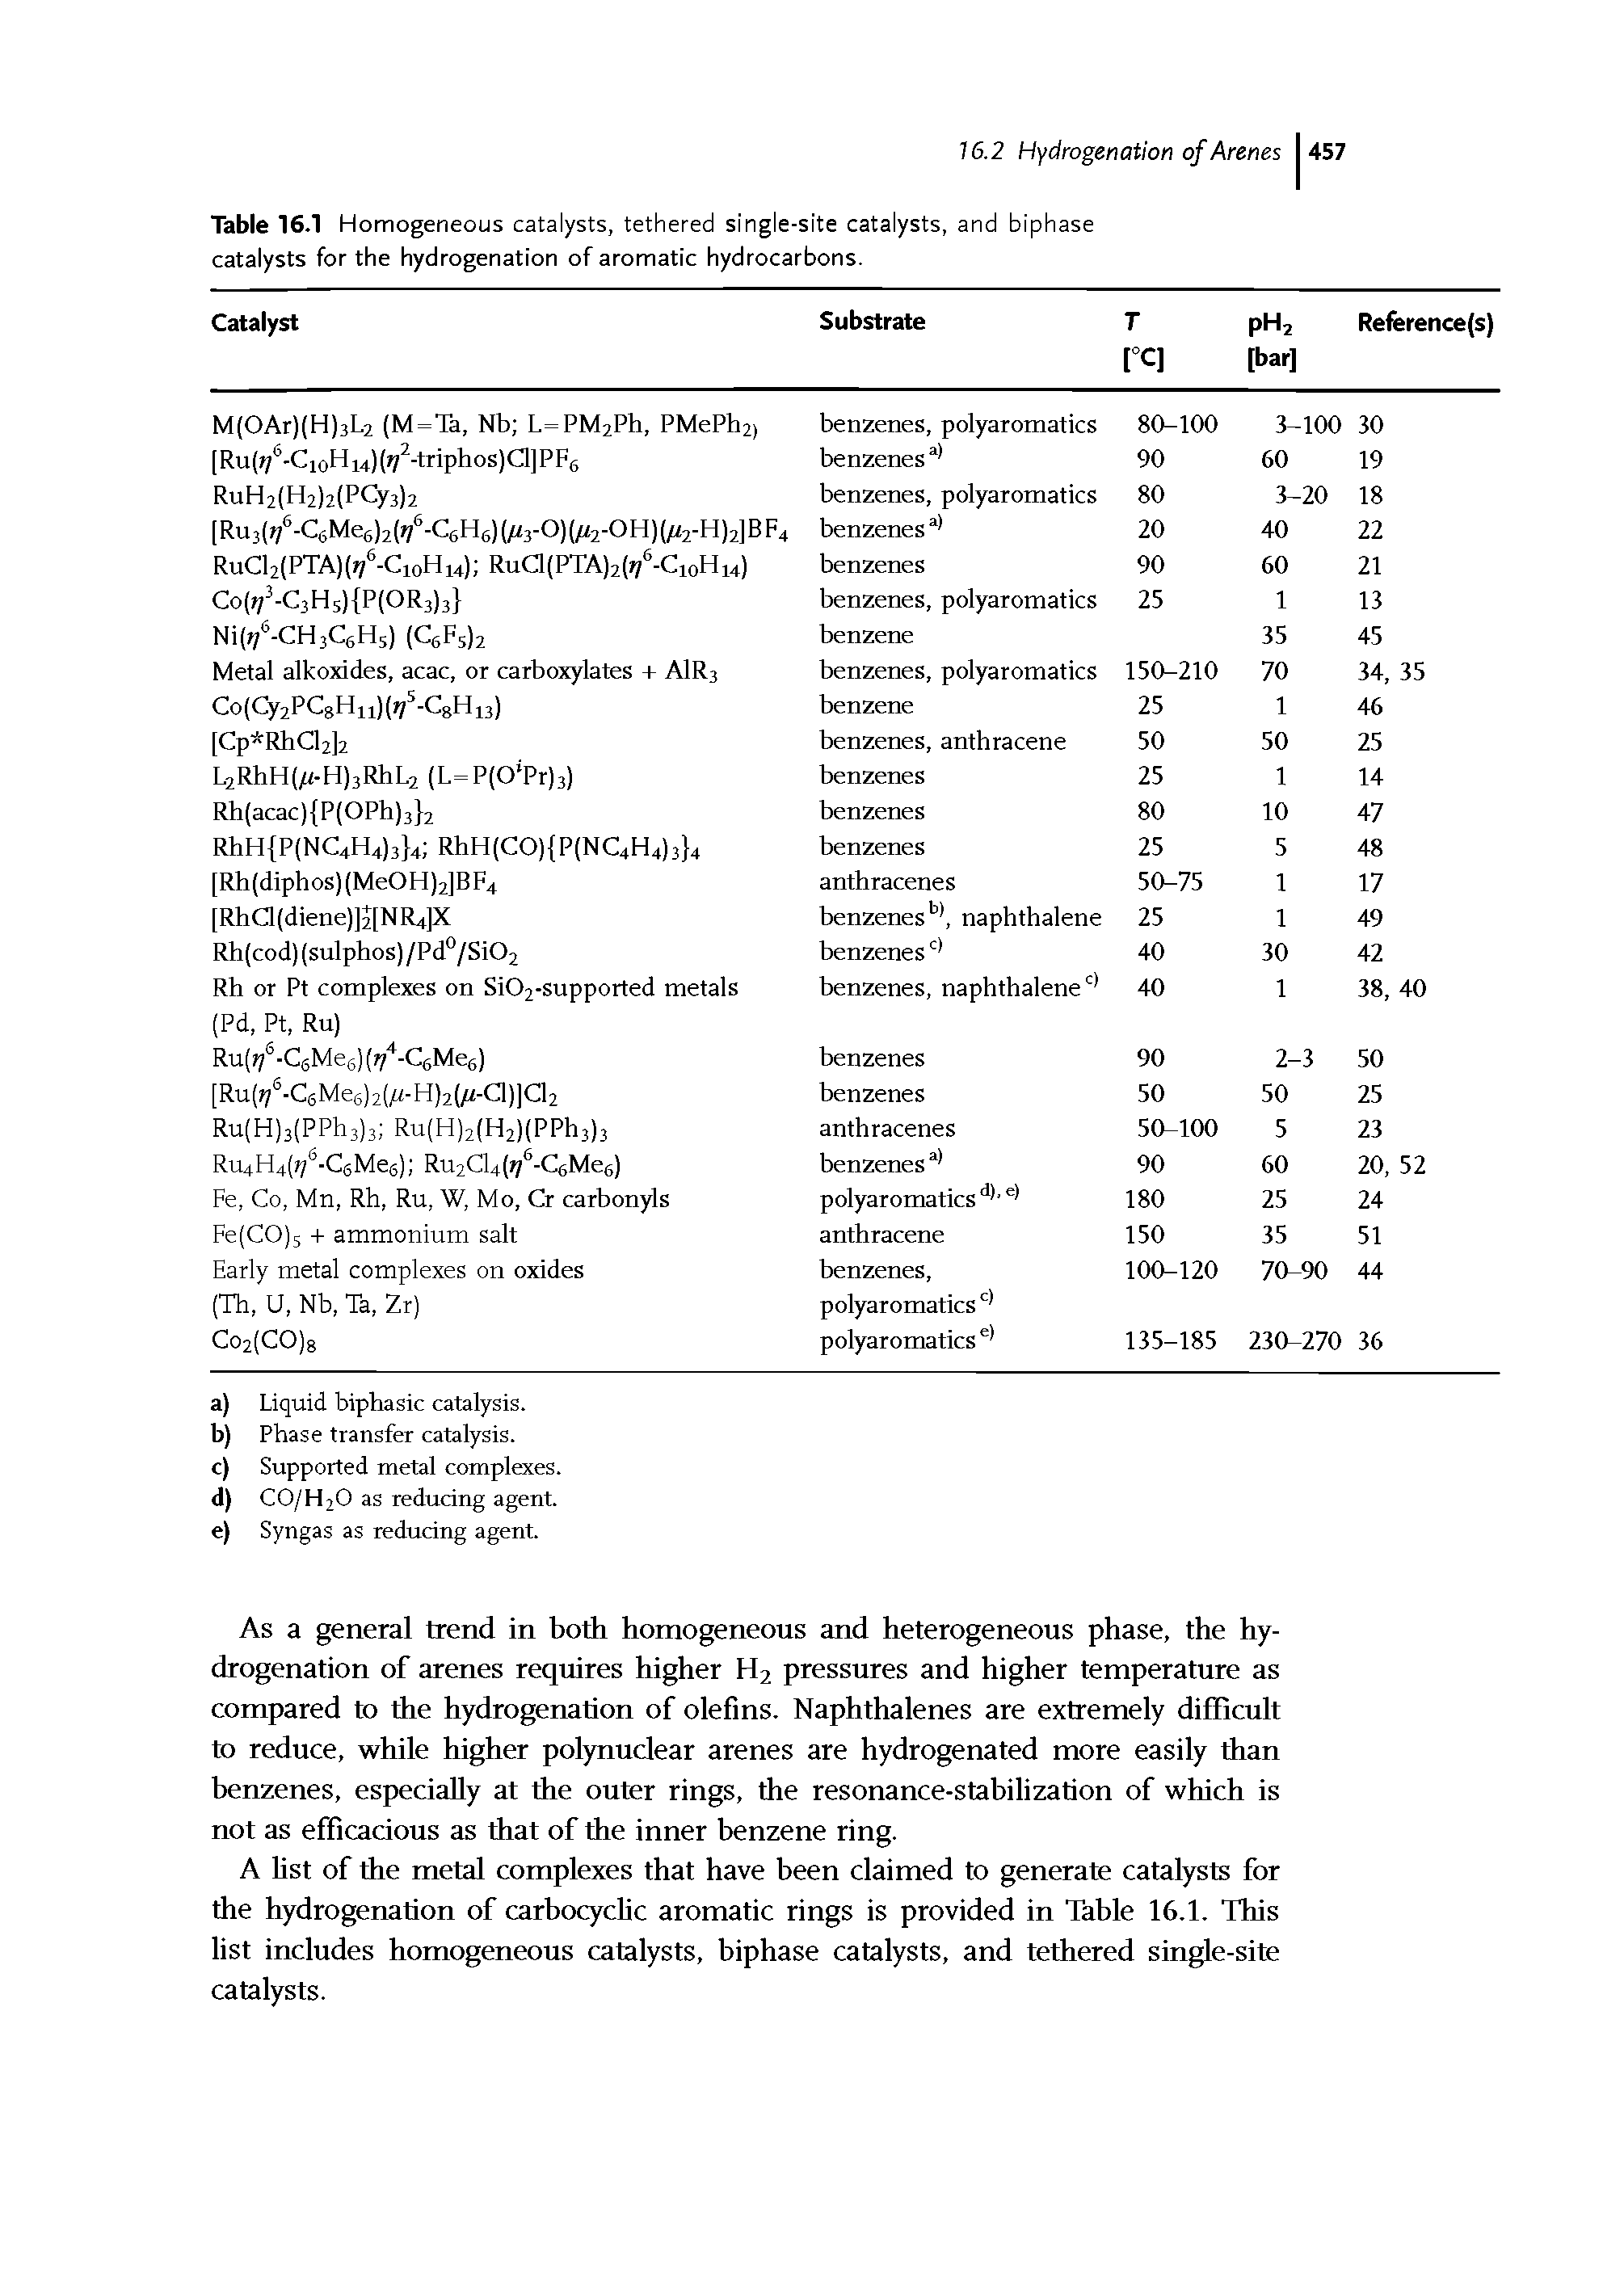 Table 16.1 Homogeneous catalysts, tethered single-site catalysts, and biphase catalysts for the hydrogenation of aromatic hydrocarbons.